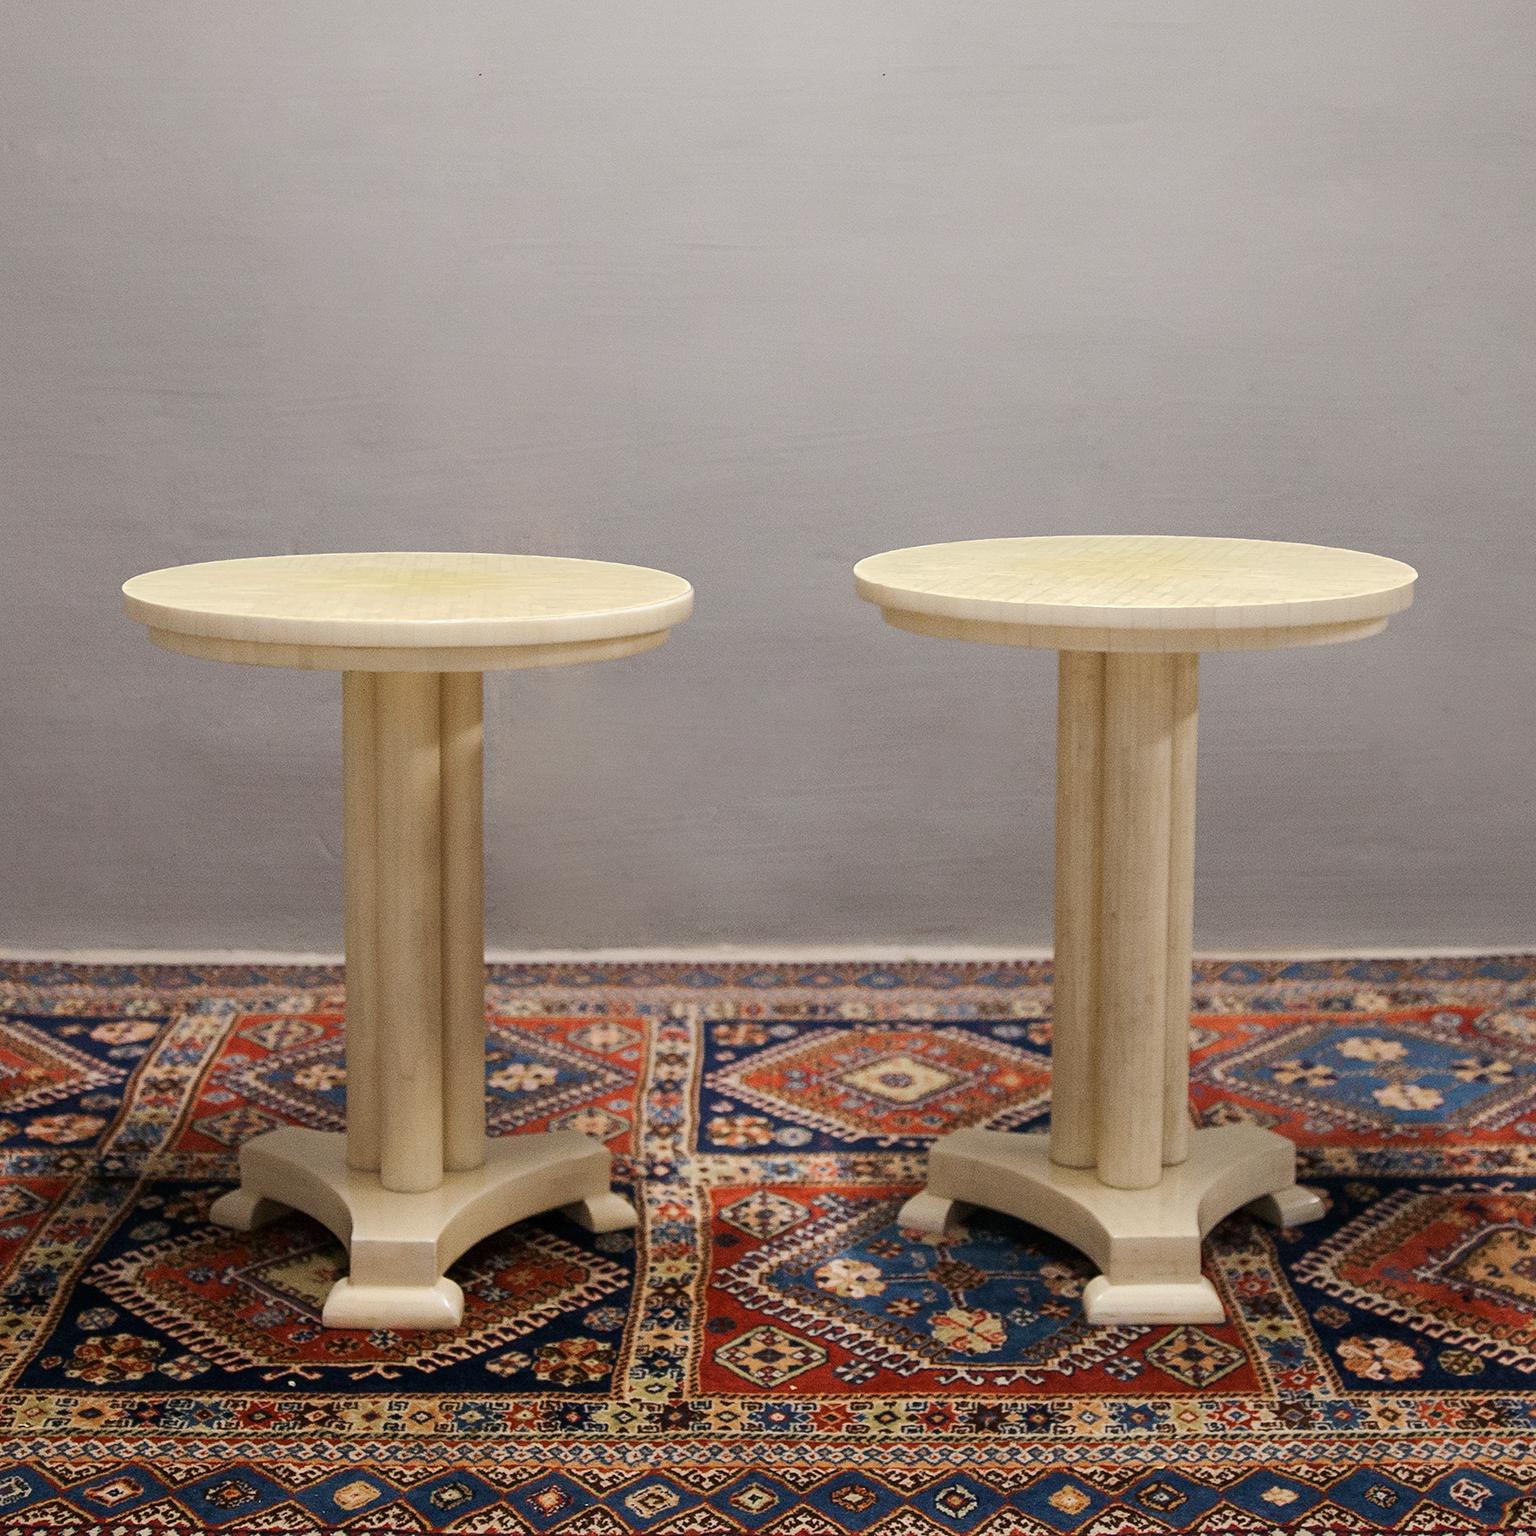 Neoclassical three-column side table with stepped top and interesting mosaic-like bone parquet. Designed by Enrique Garcel for Pilati Interior in Germany. Marked with brass plate at the bottom. Very good vintage condition with slight variations in